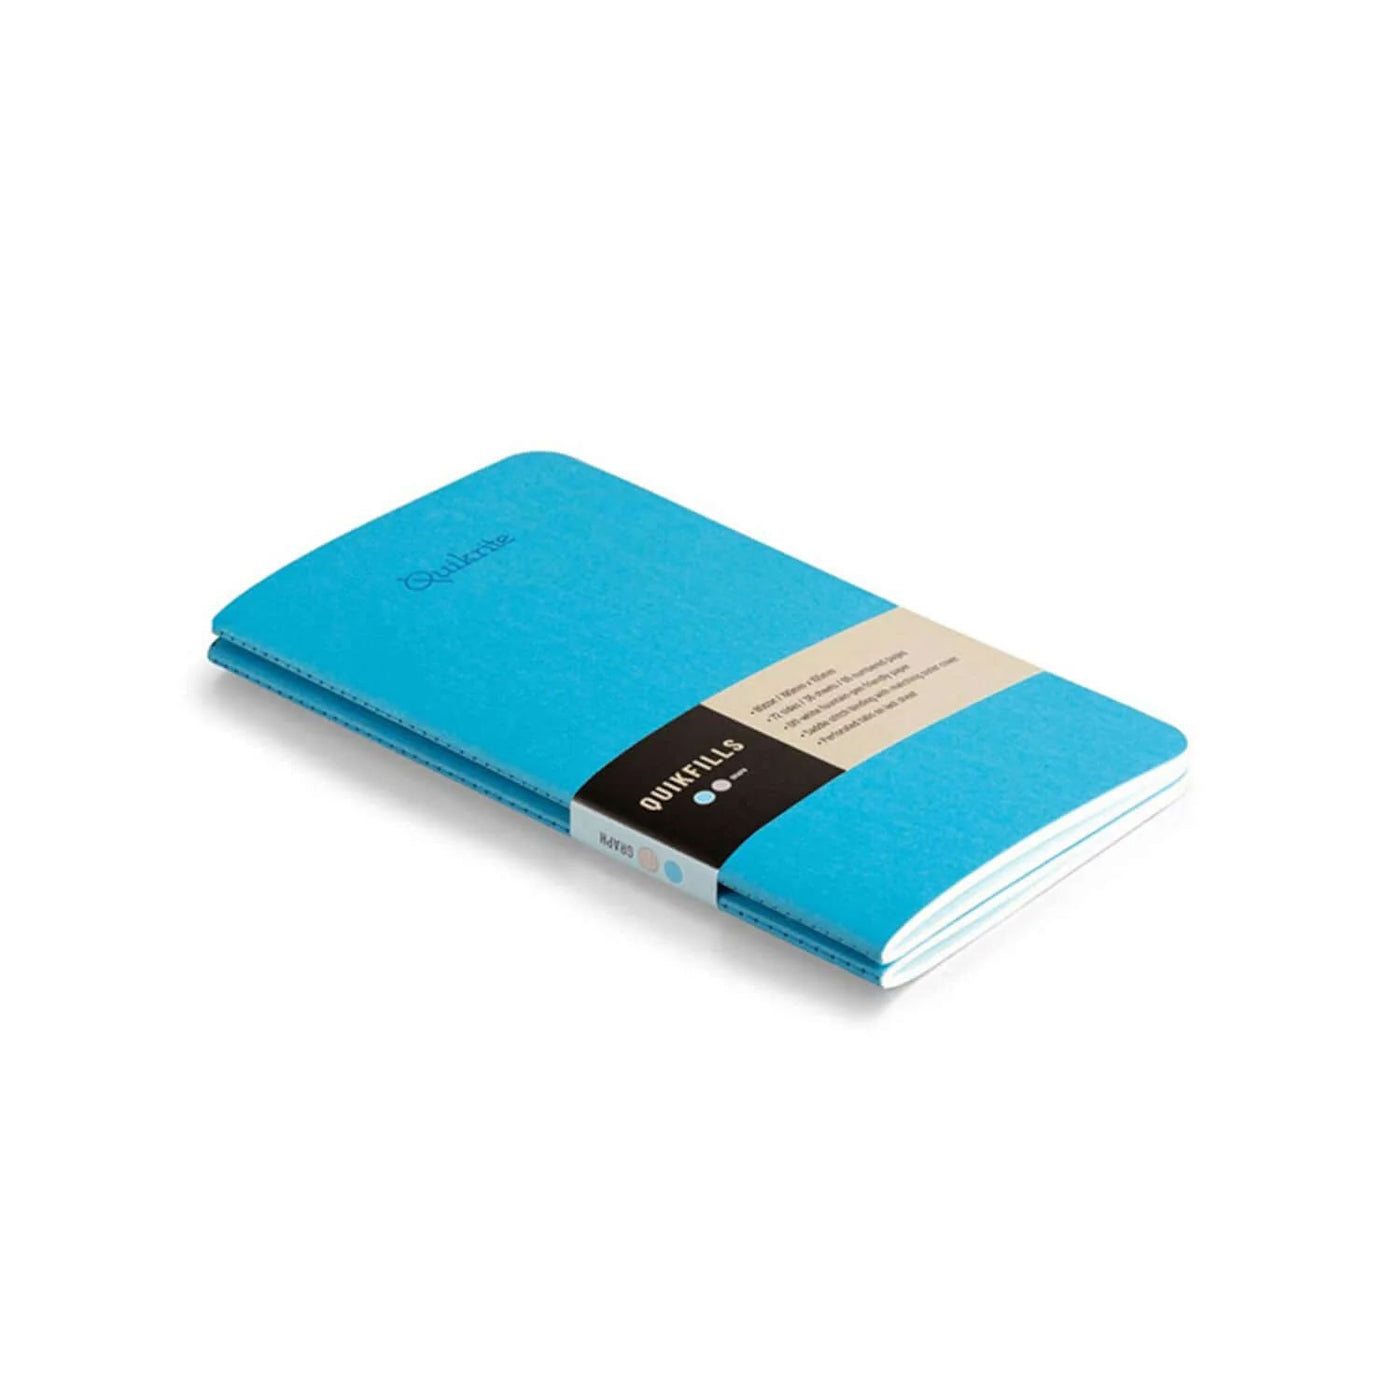 Pennline Quikfill Notebook Refill For Quikrite, Turquoise - Set Of 2 2